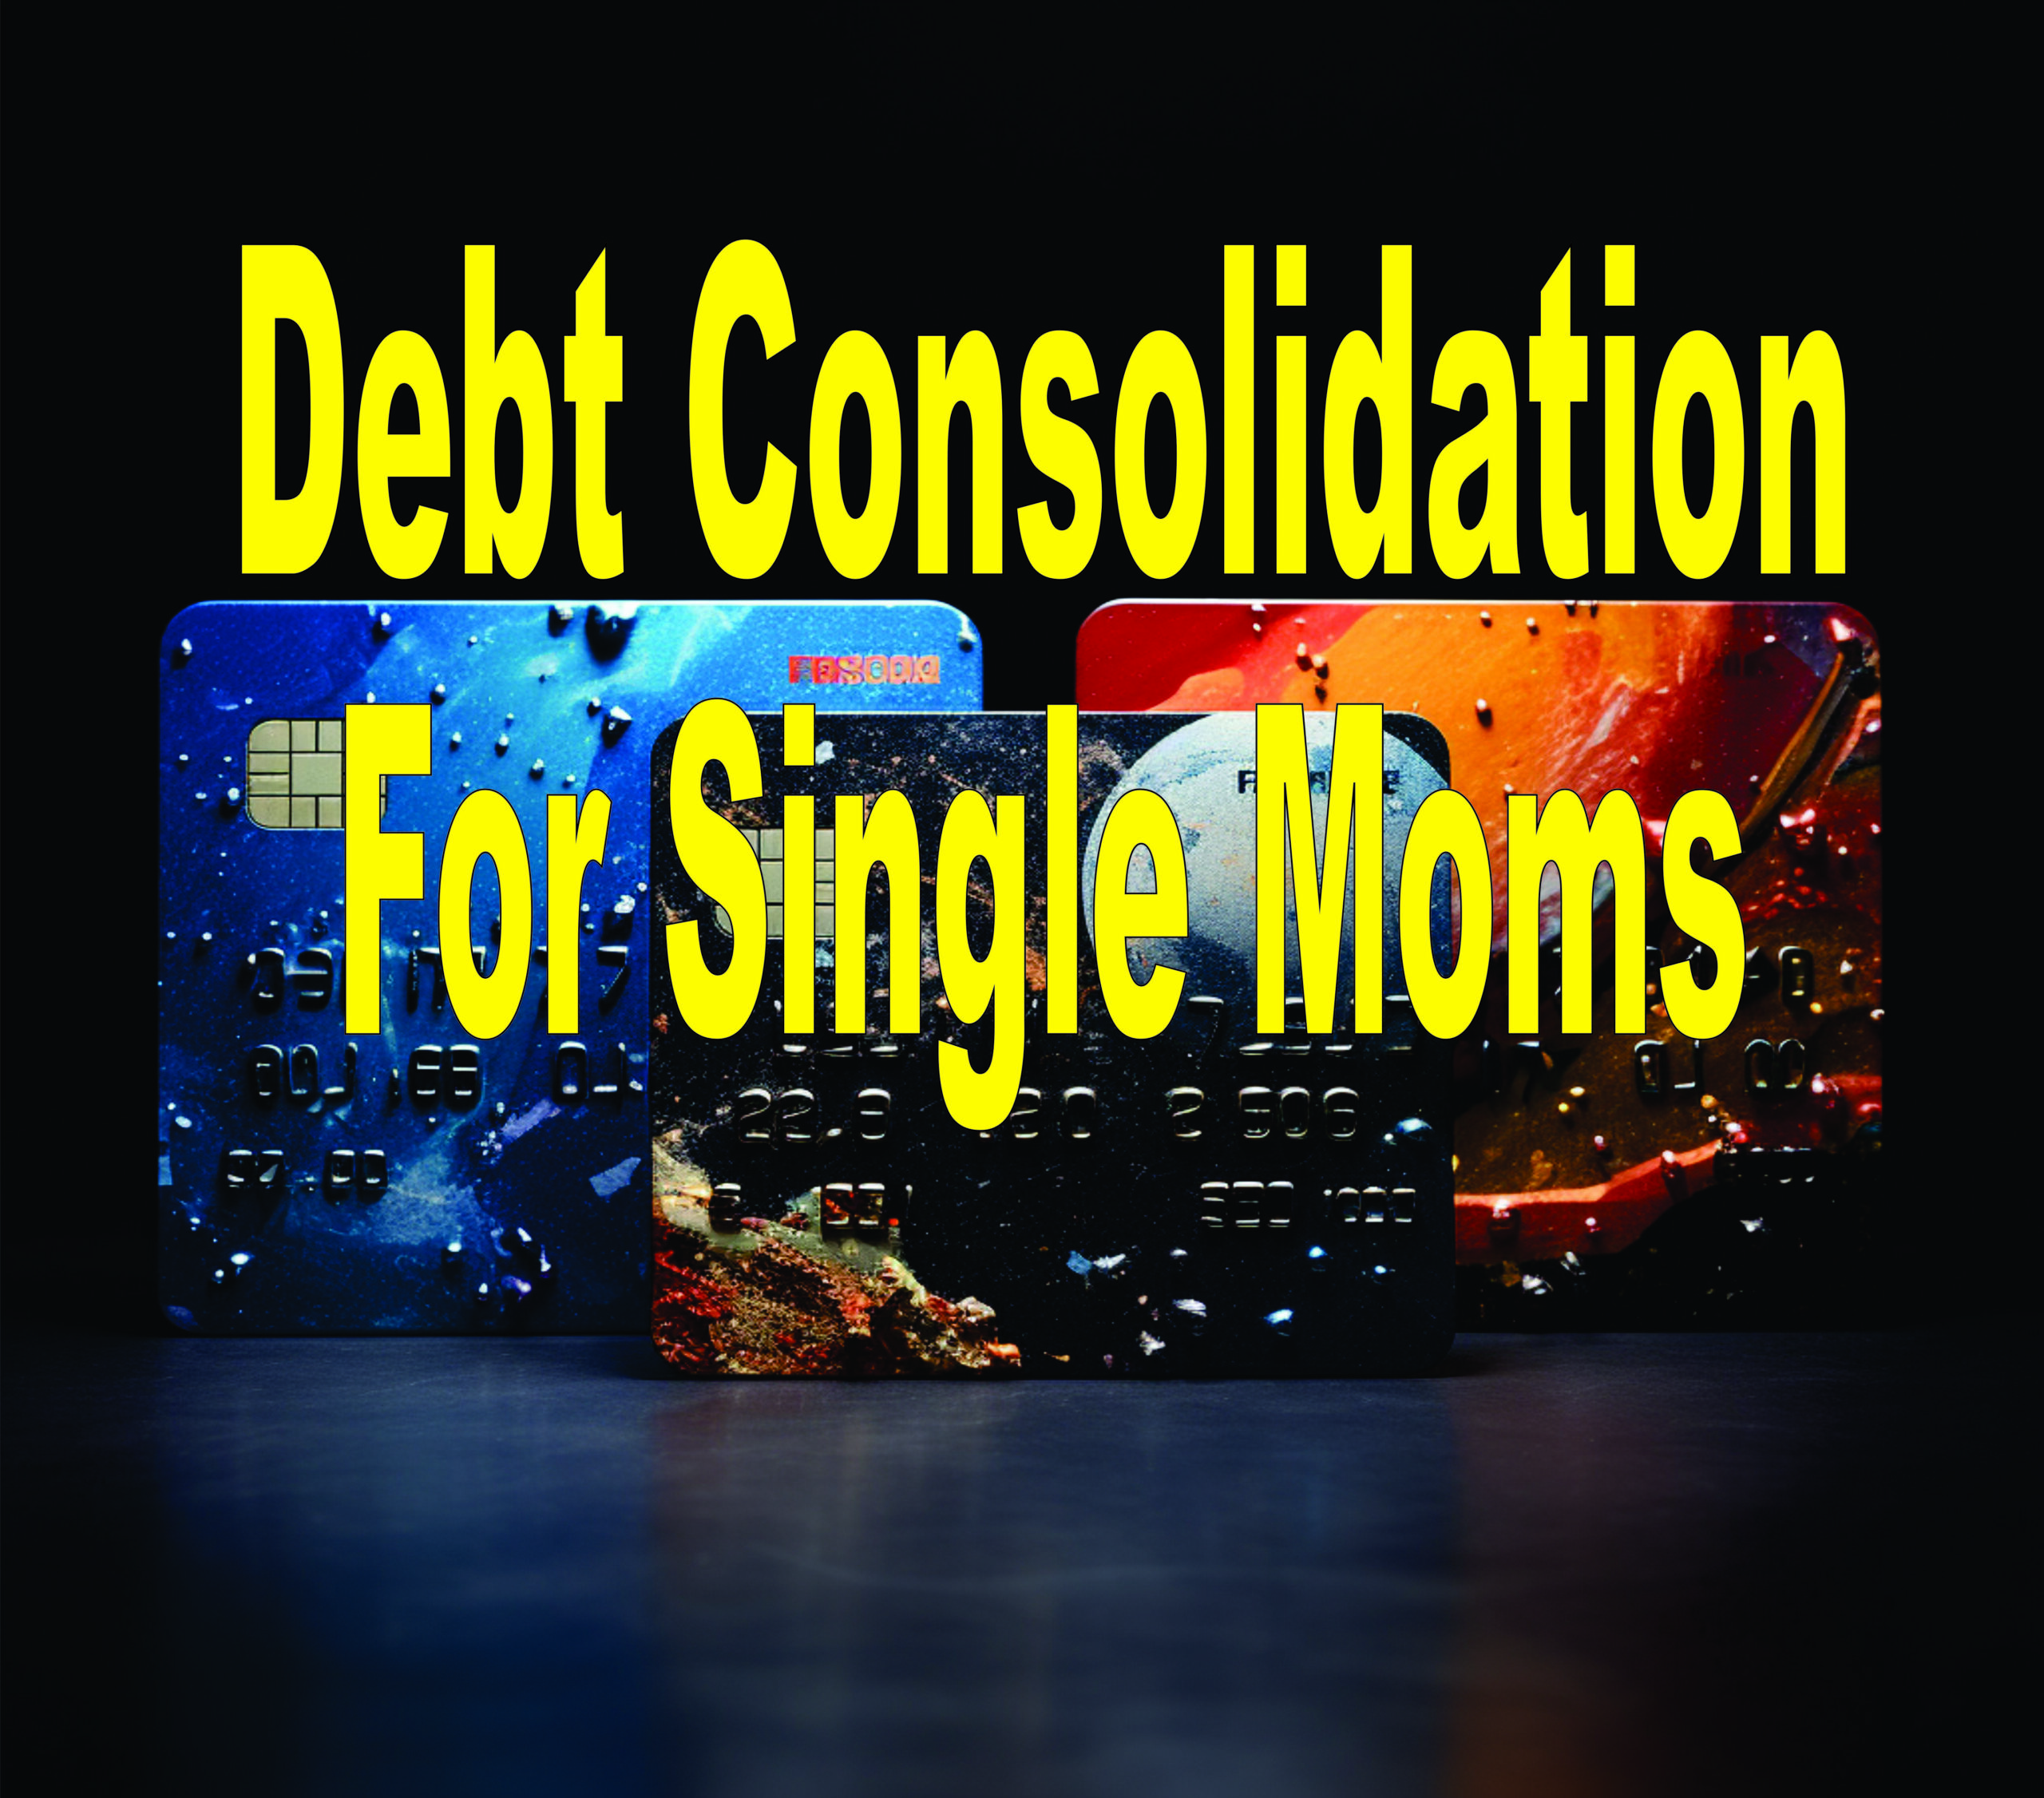 Debt Consolidation For Single Moms